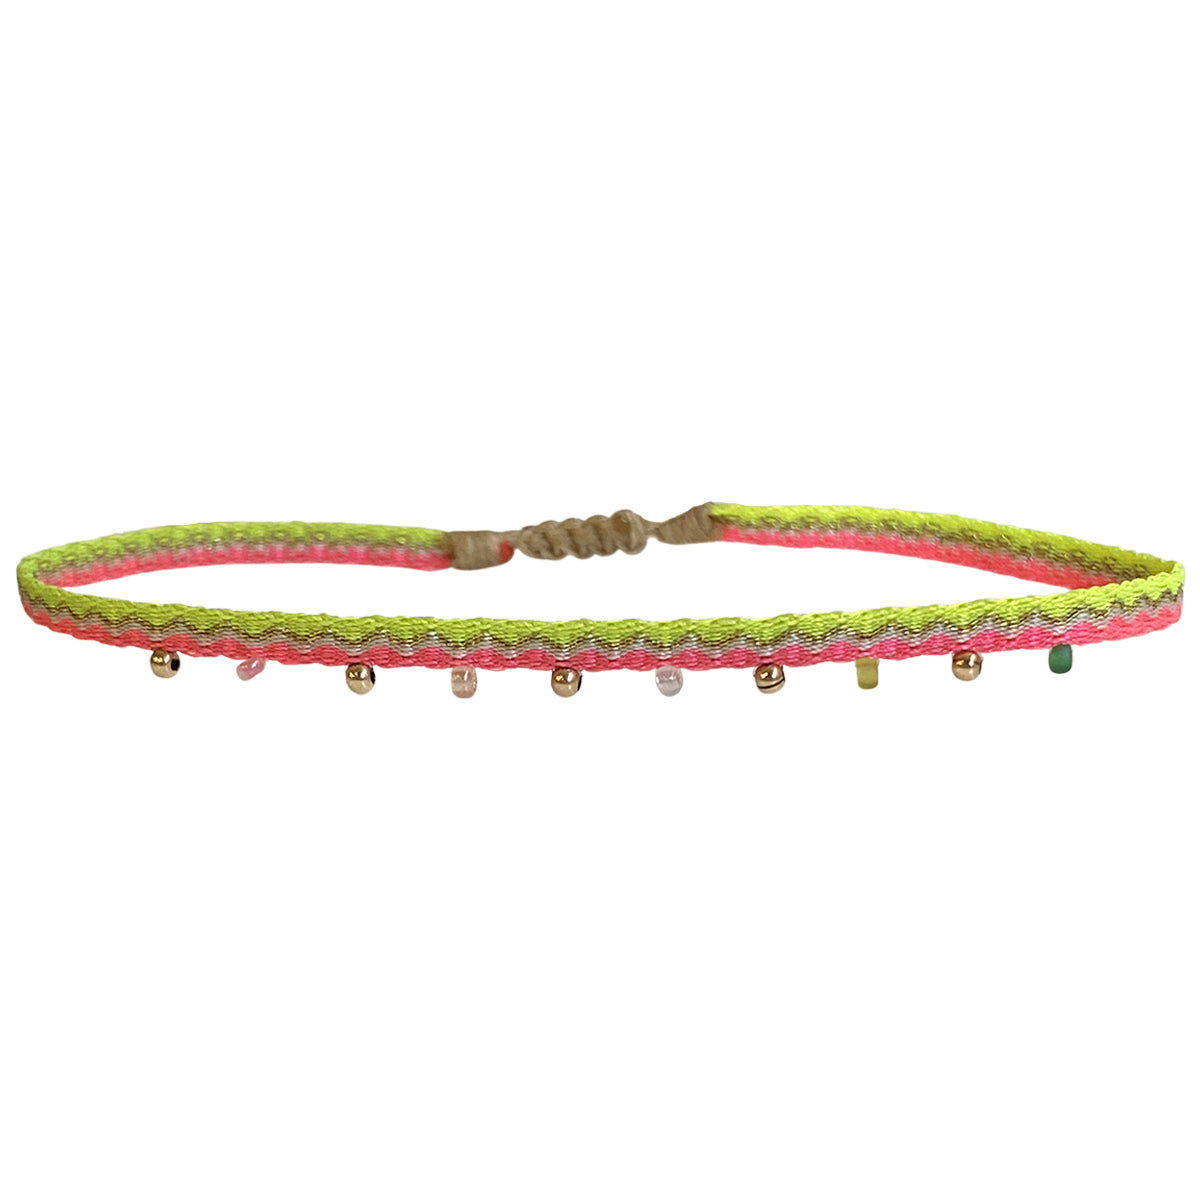 NEON PINK & YELLOW ANKLET